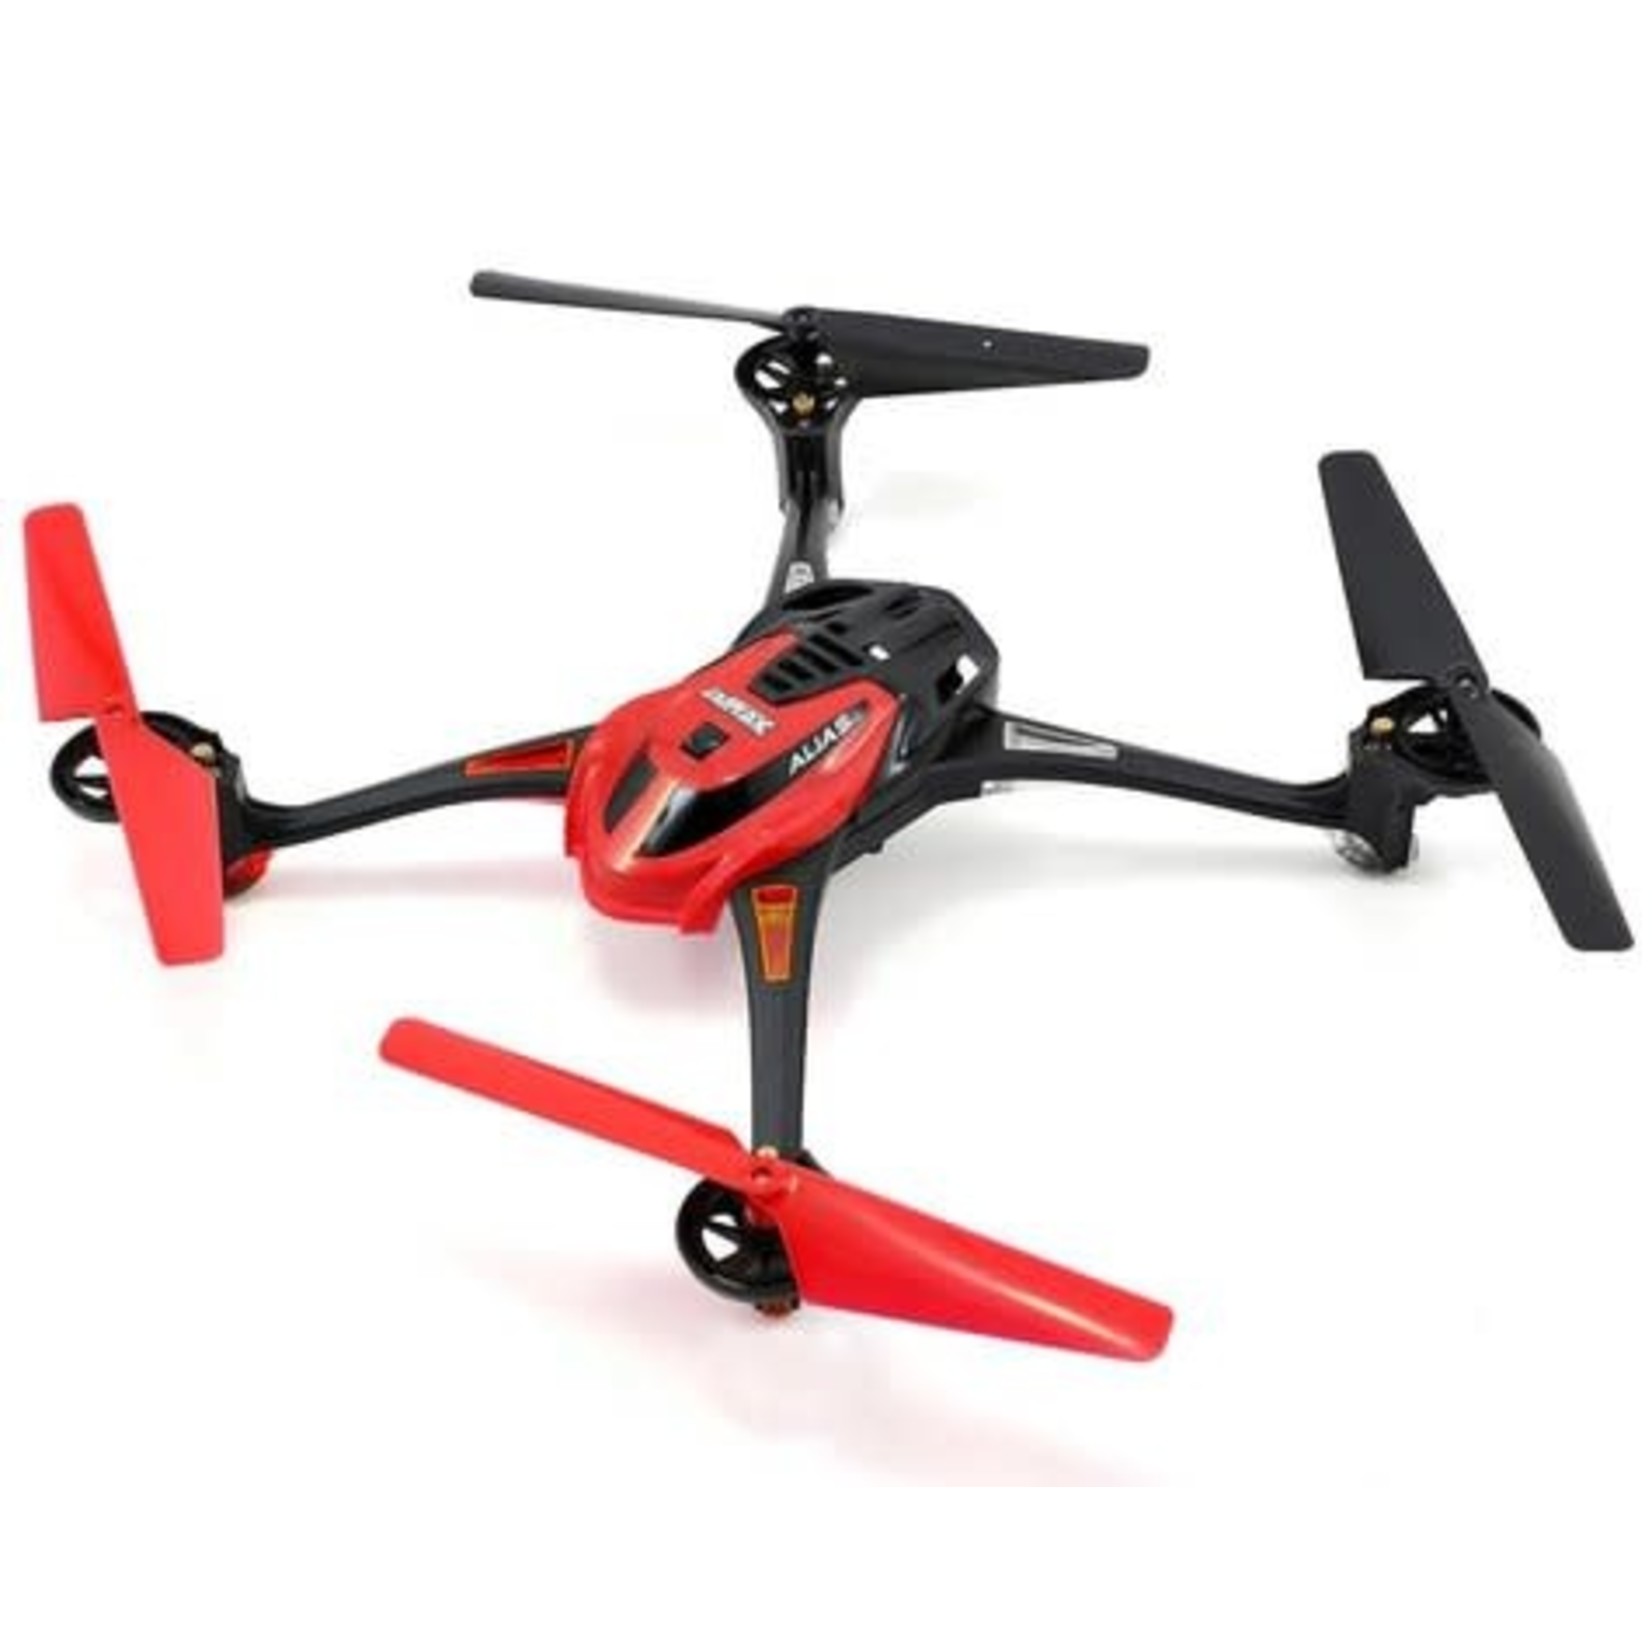 Traxxas Traxxas LaTrax Alias Ready-To-Fly Micro Electric Quadcopter Drone (Red) #6608-RED